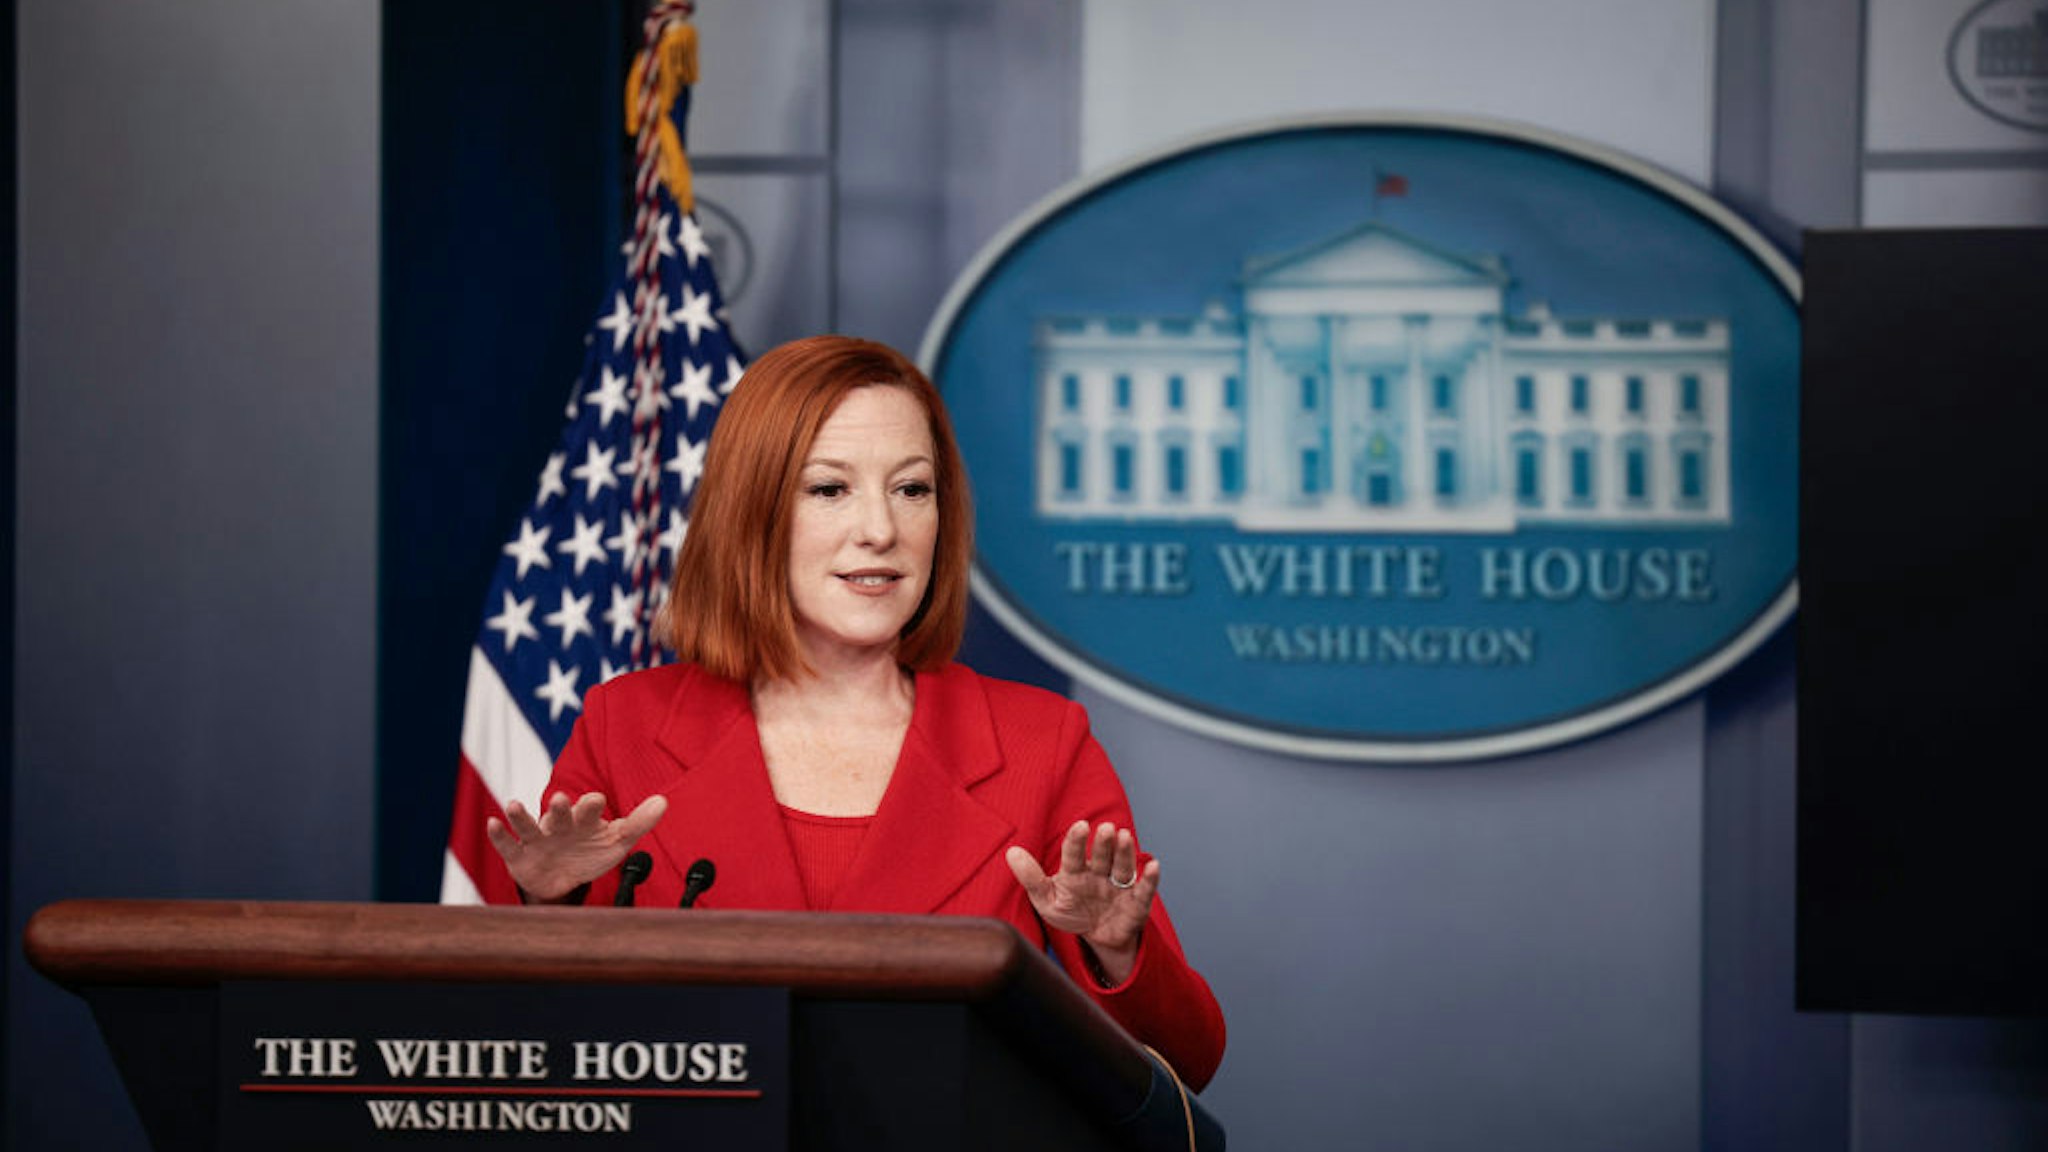 WASHINGTON, DC - DECEMBER 02: White House Press Secretary Jen Psaki speaks during a daily news briefing at the James S. Brady Press Briefing Room of the White House on December 02, 2021 in Washington, DC. Psaki spoke on a number of topics including President Biden's visit today to the National Institutes of Health where he is expected to lay out new steps to combat the Omicron COVID-19 variant. (Photo by Anna Moneymaker/Getty Images)